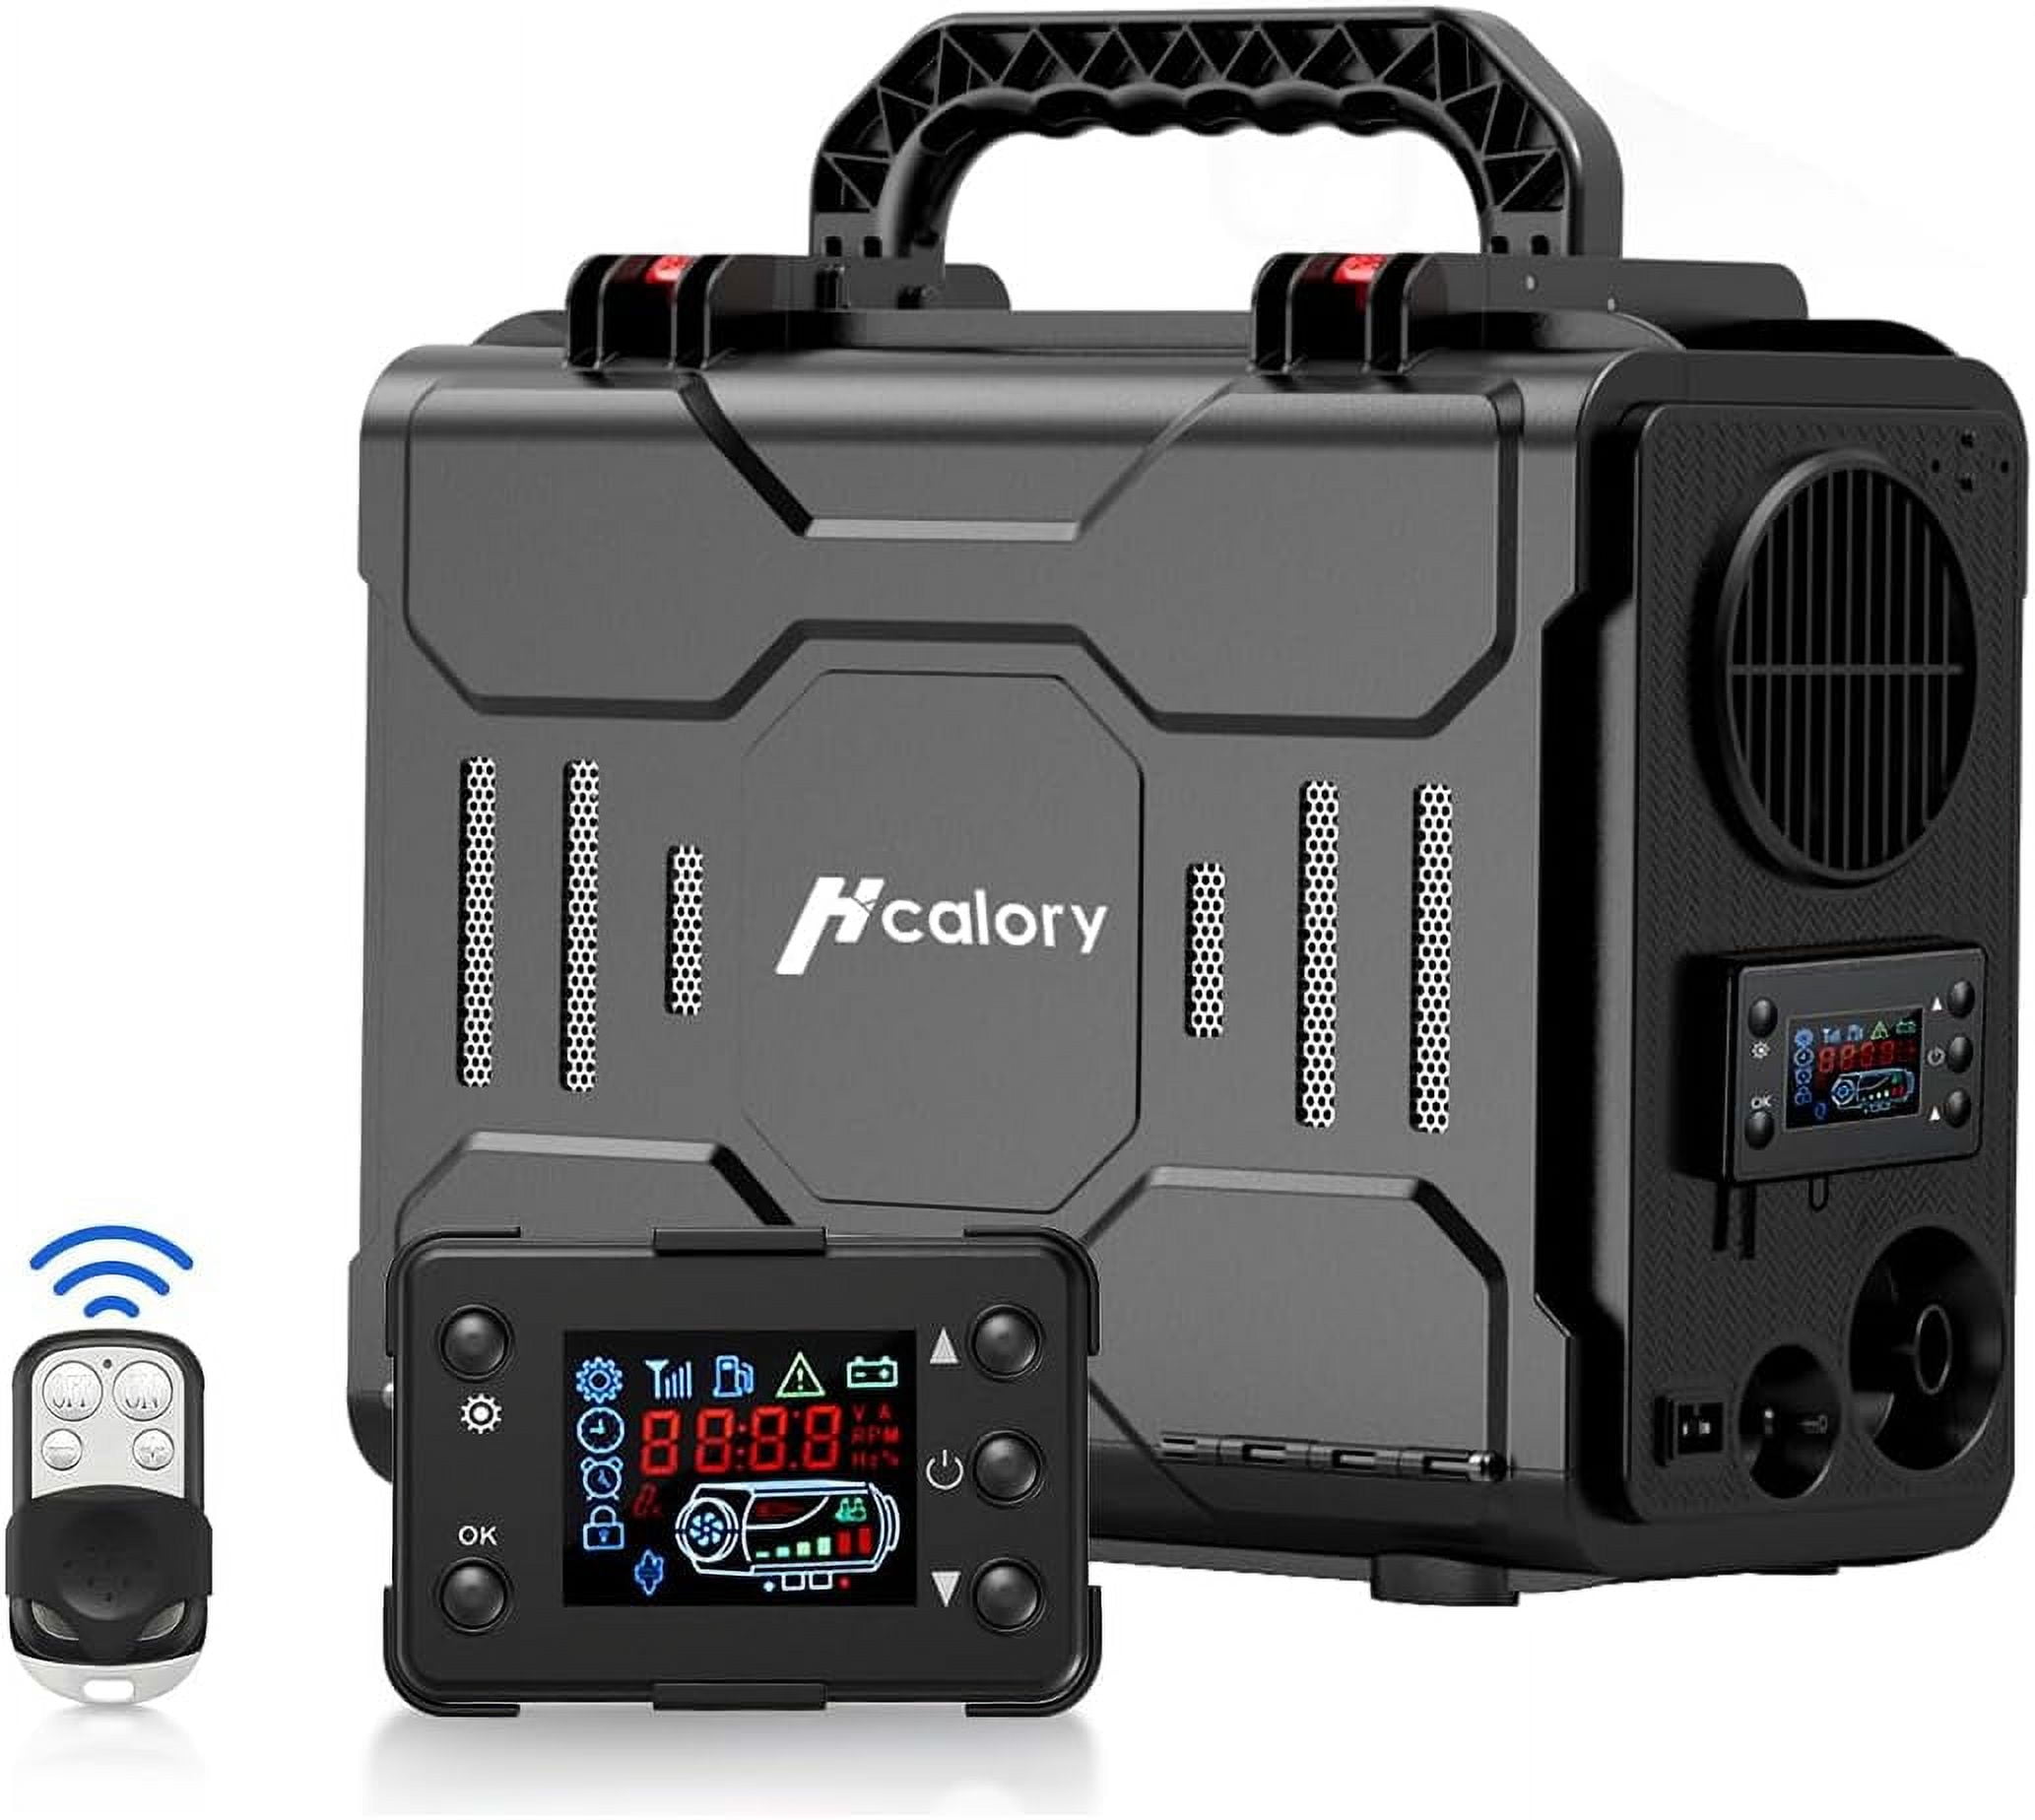 Hcalory Diesel Air Heater, 12V 5KW All-In-One Portable Handheld Toolbox with Bluetooth App Control and LCD Monitor for Car Trucks Boat Bus RV Trailer